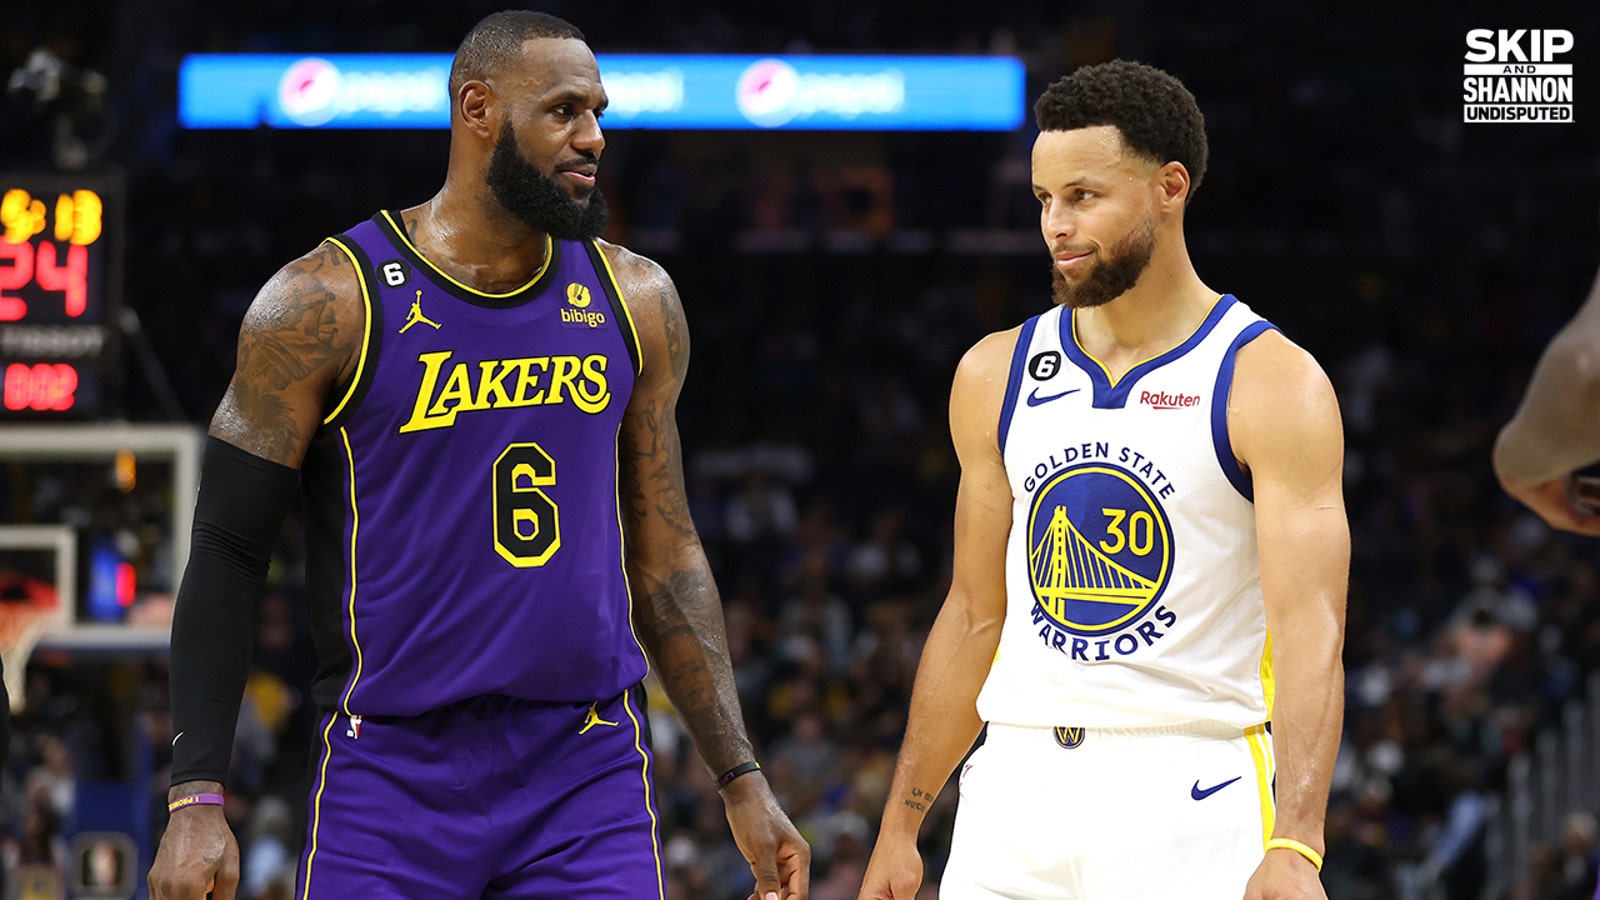 Steph Curry, Warriors blowout Lakers in NBA season opener despite LeBron's 31 points